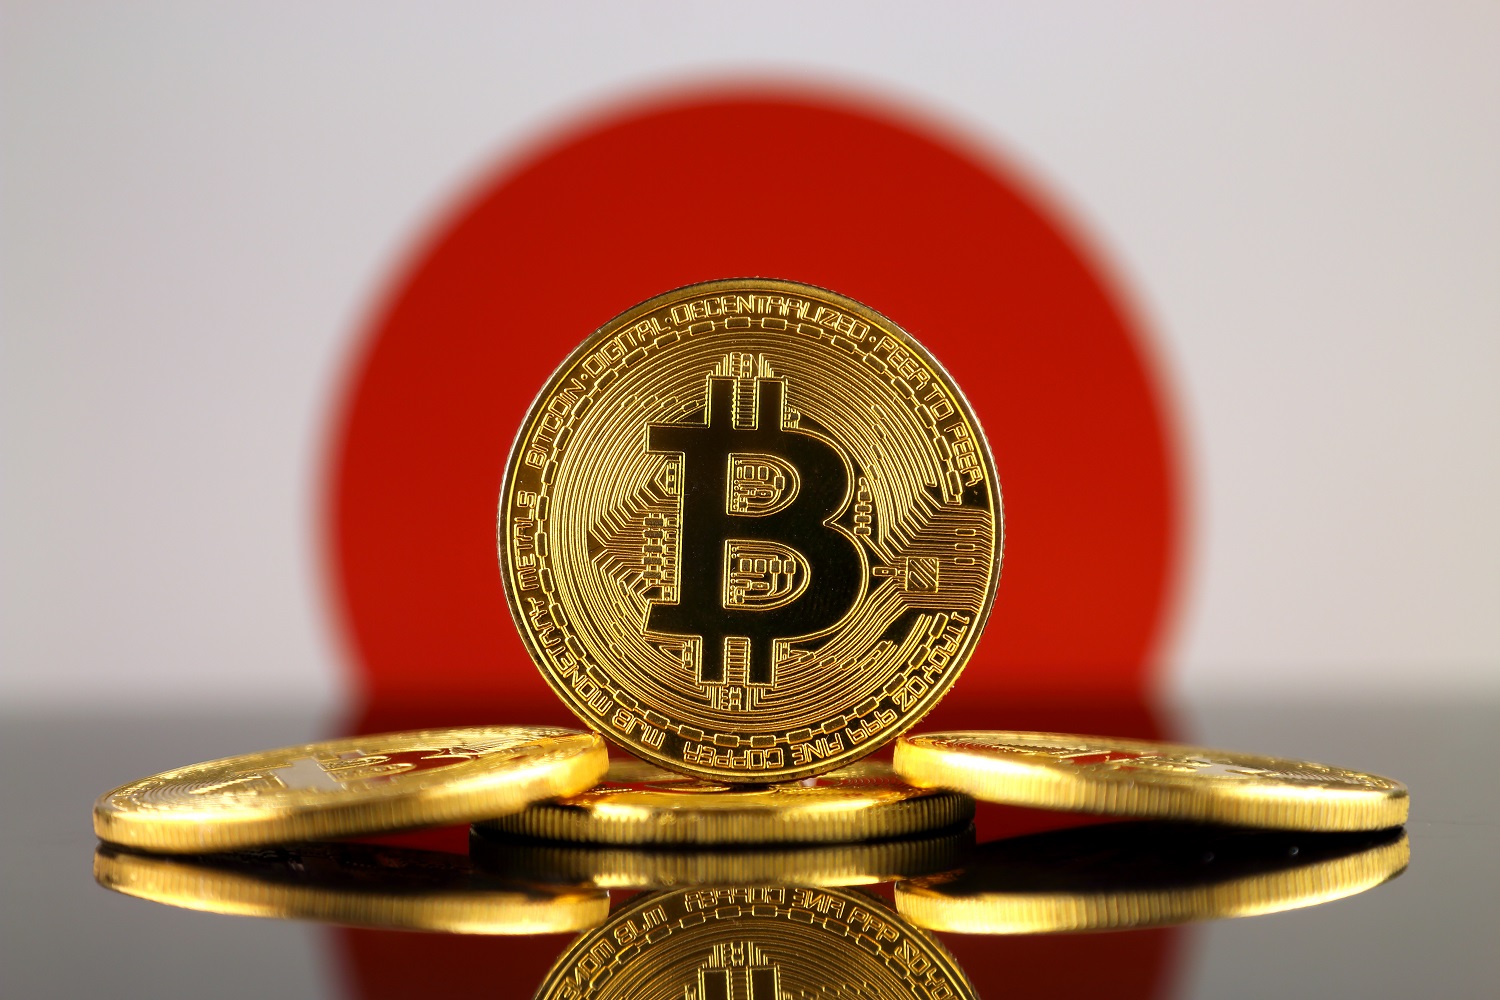 Five metal tokens intended to represent Bitcoin against the backdrop of the Japanese flag.